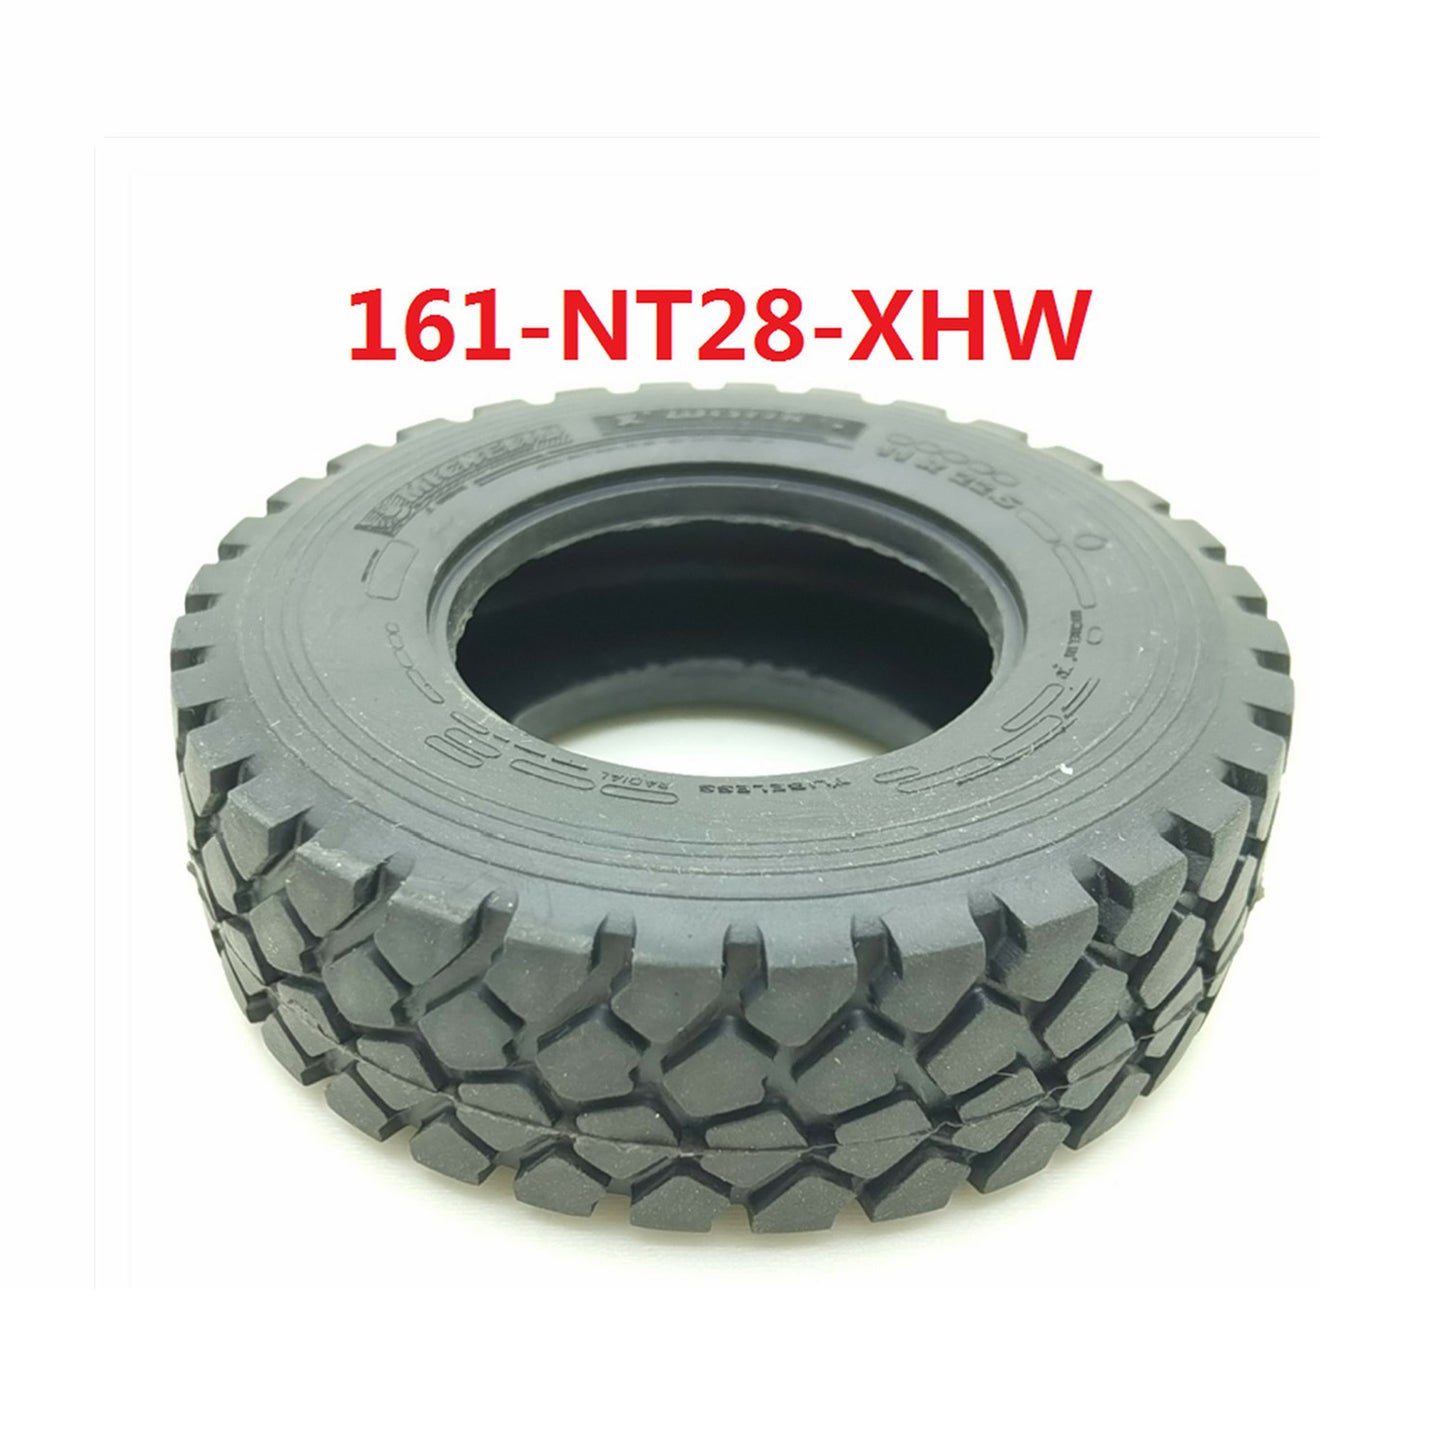 Degree Car Parts Rubber Wheel Tires One Pair for DIY Tamiye 1/14 Remote Control RC Tractor Truck 770S 56368 22/28MM 85MM